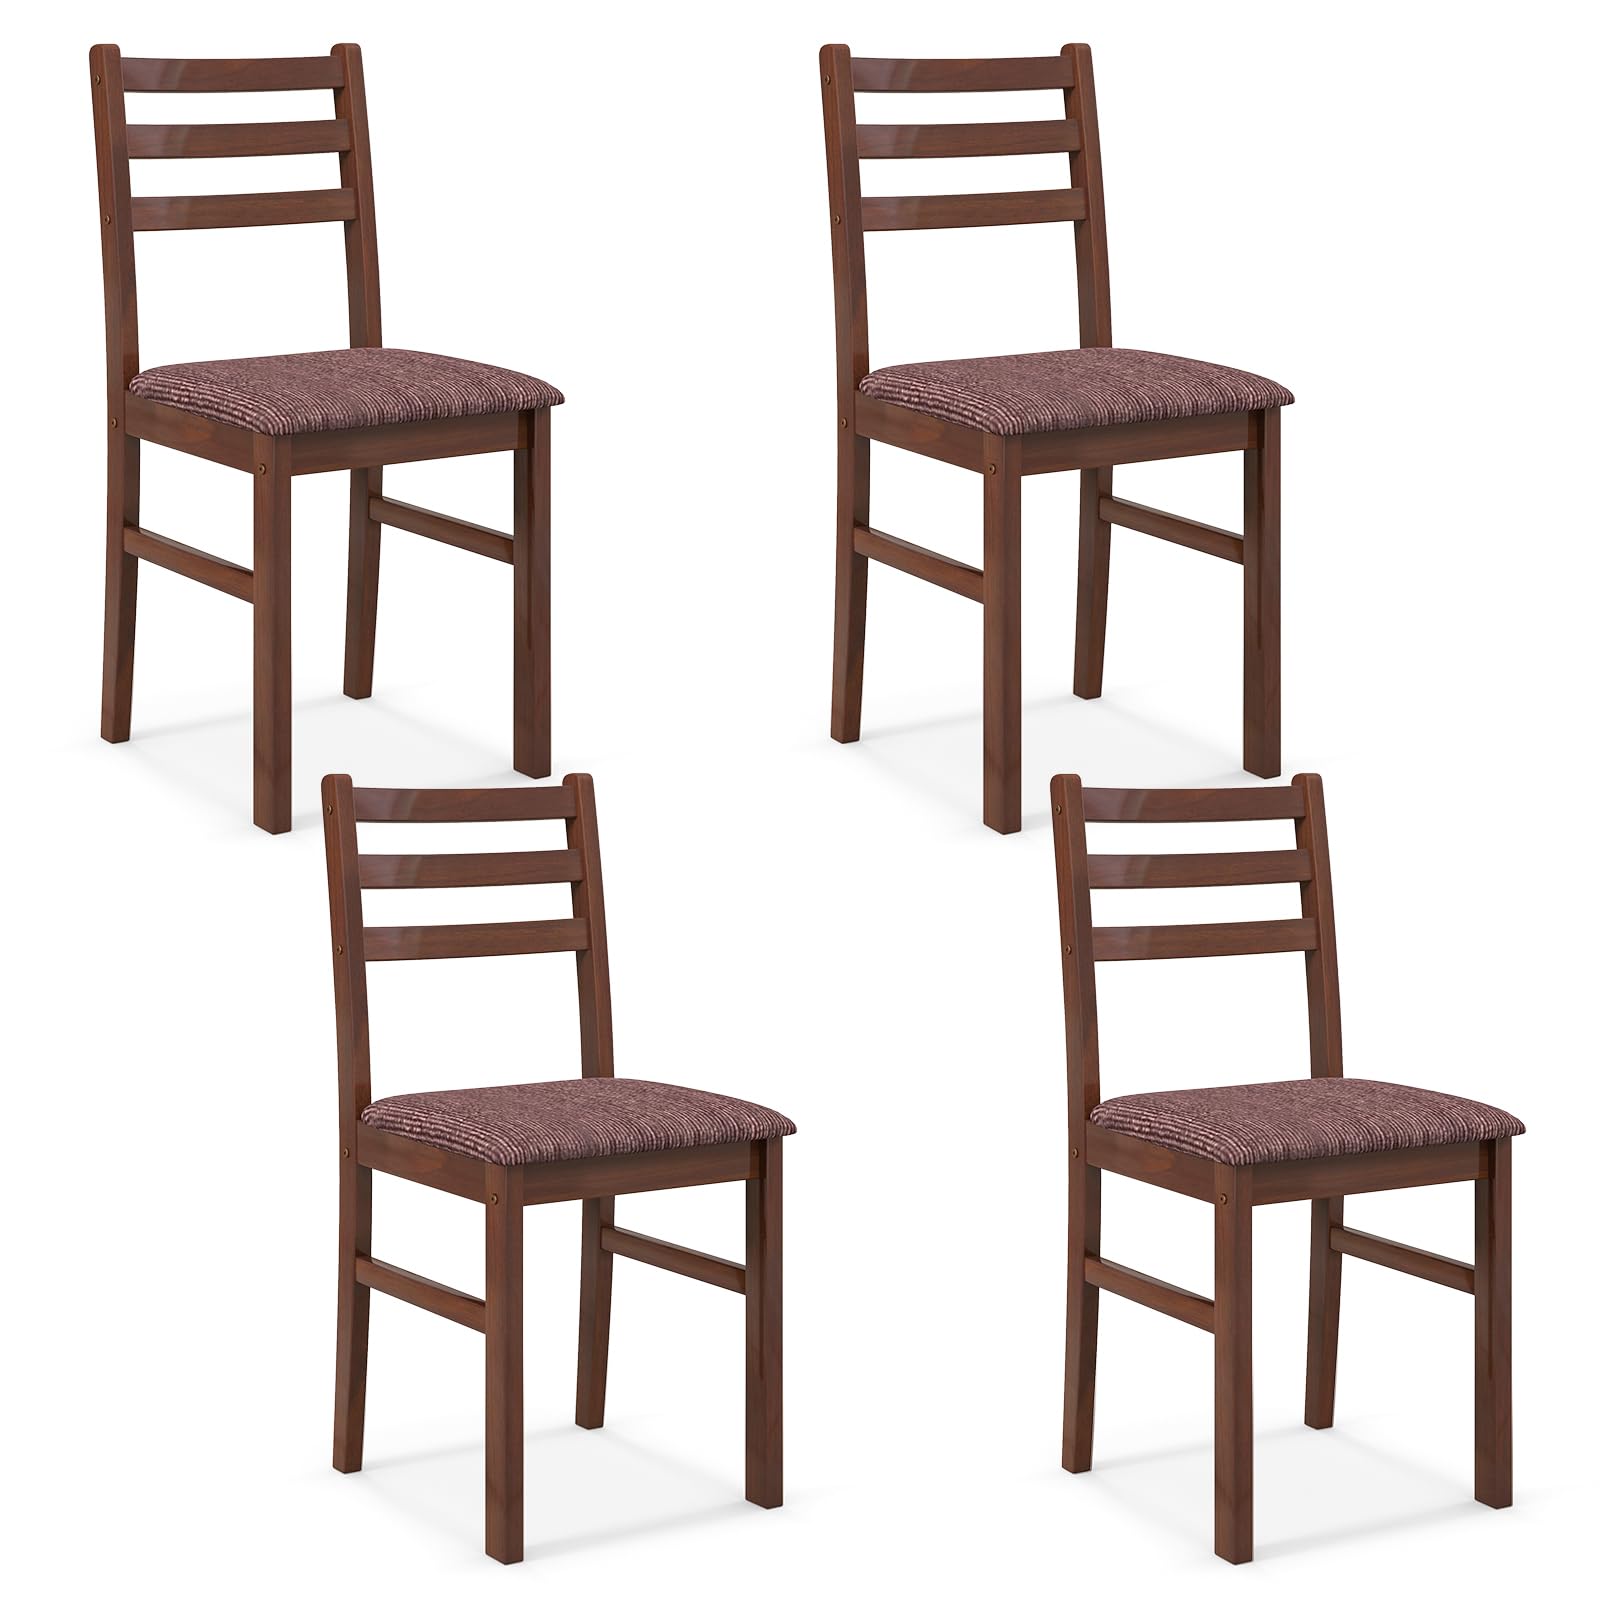 Giantex Wooden Dining Chairs Walnut Set of 4, Farmhouse Kitchen Chairs with Rubber Wood Frame, Mid-Century Dining Chair with Padded Seat